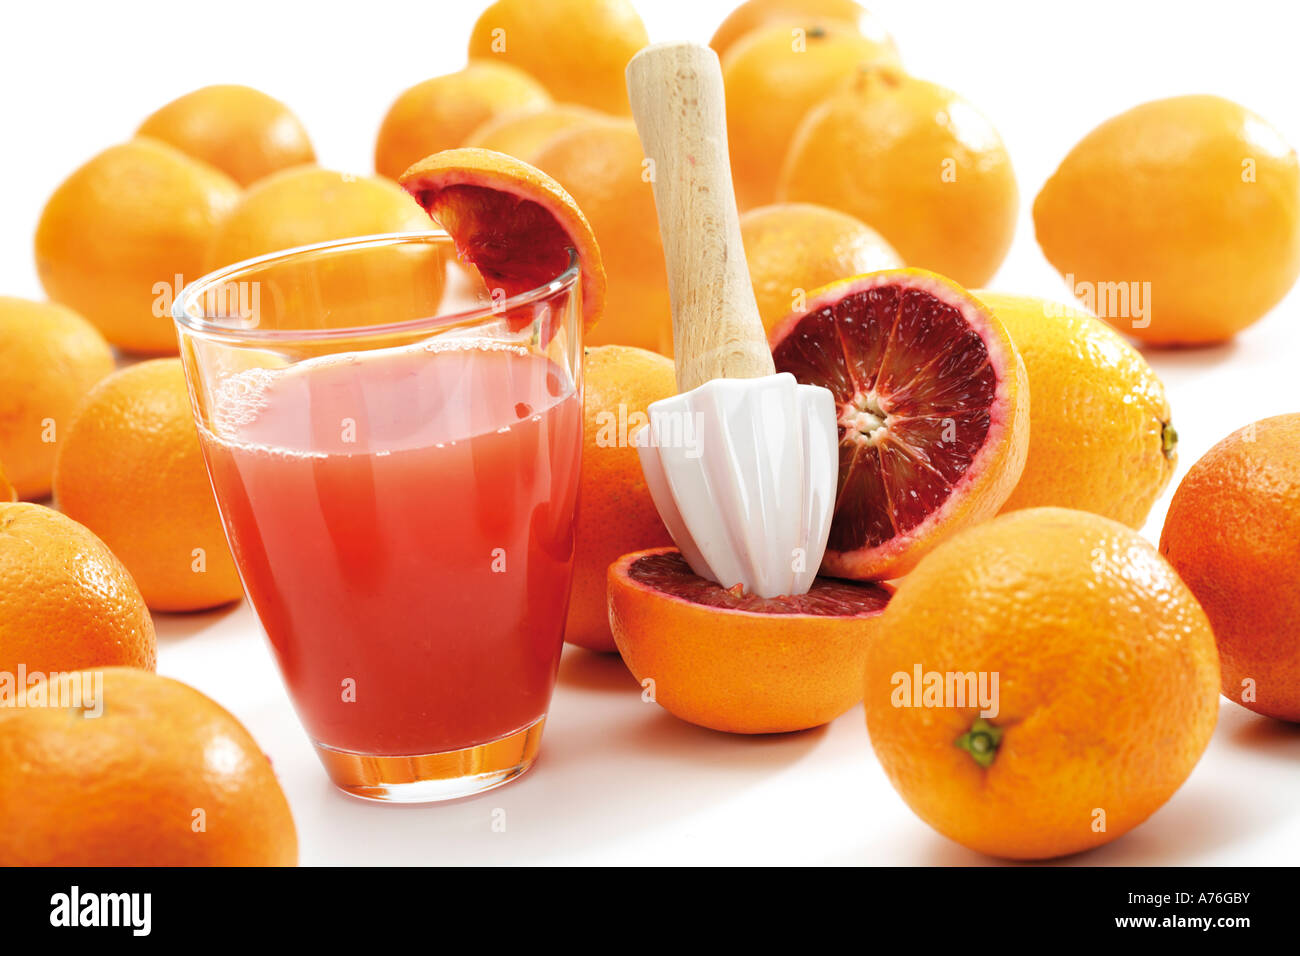 Squeezer on sliced blood orange and glass of juice Stock Photo